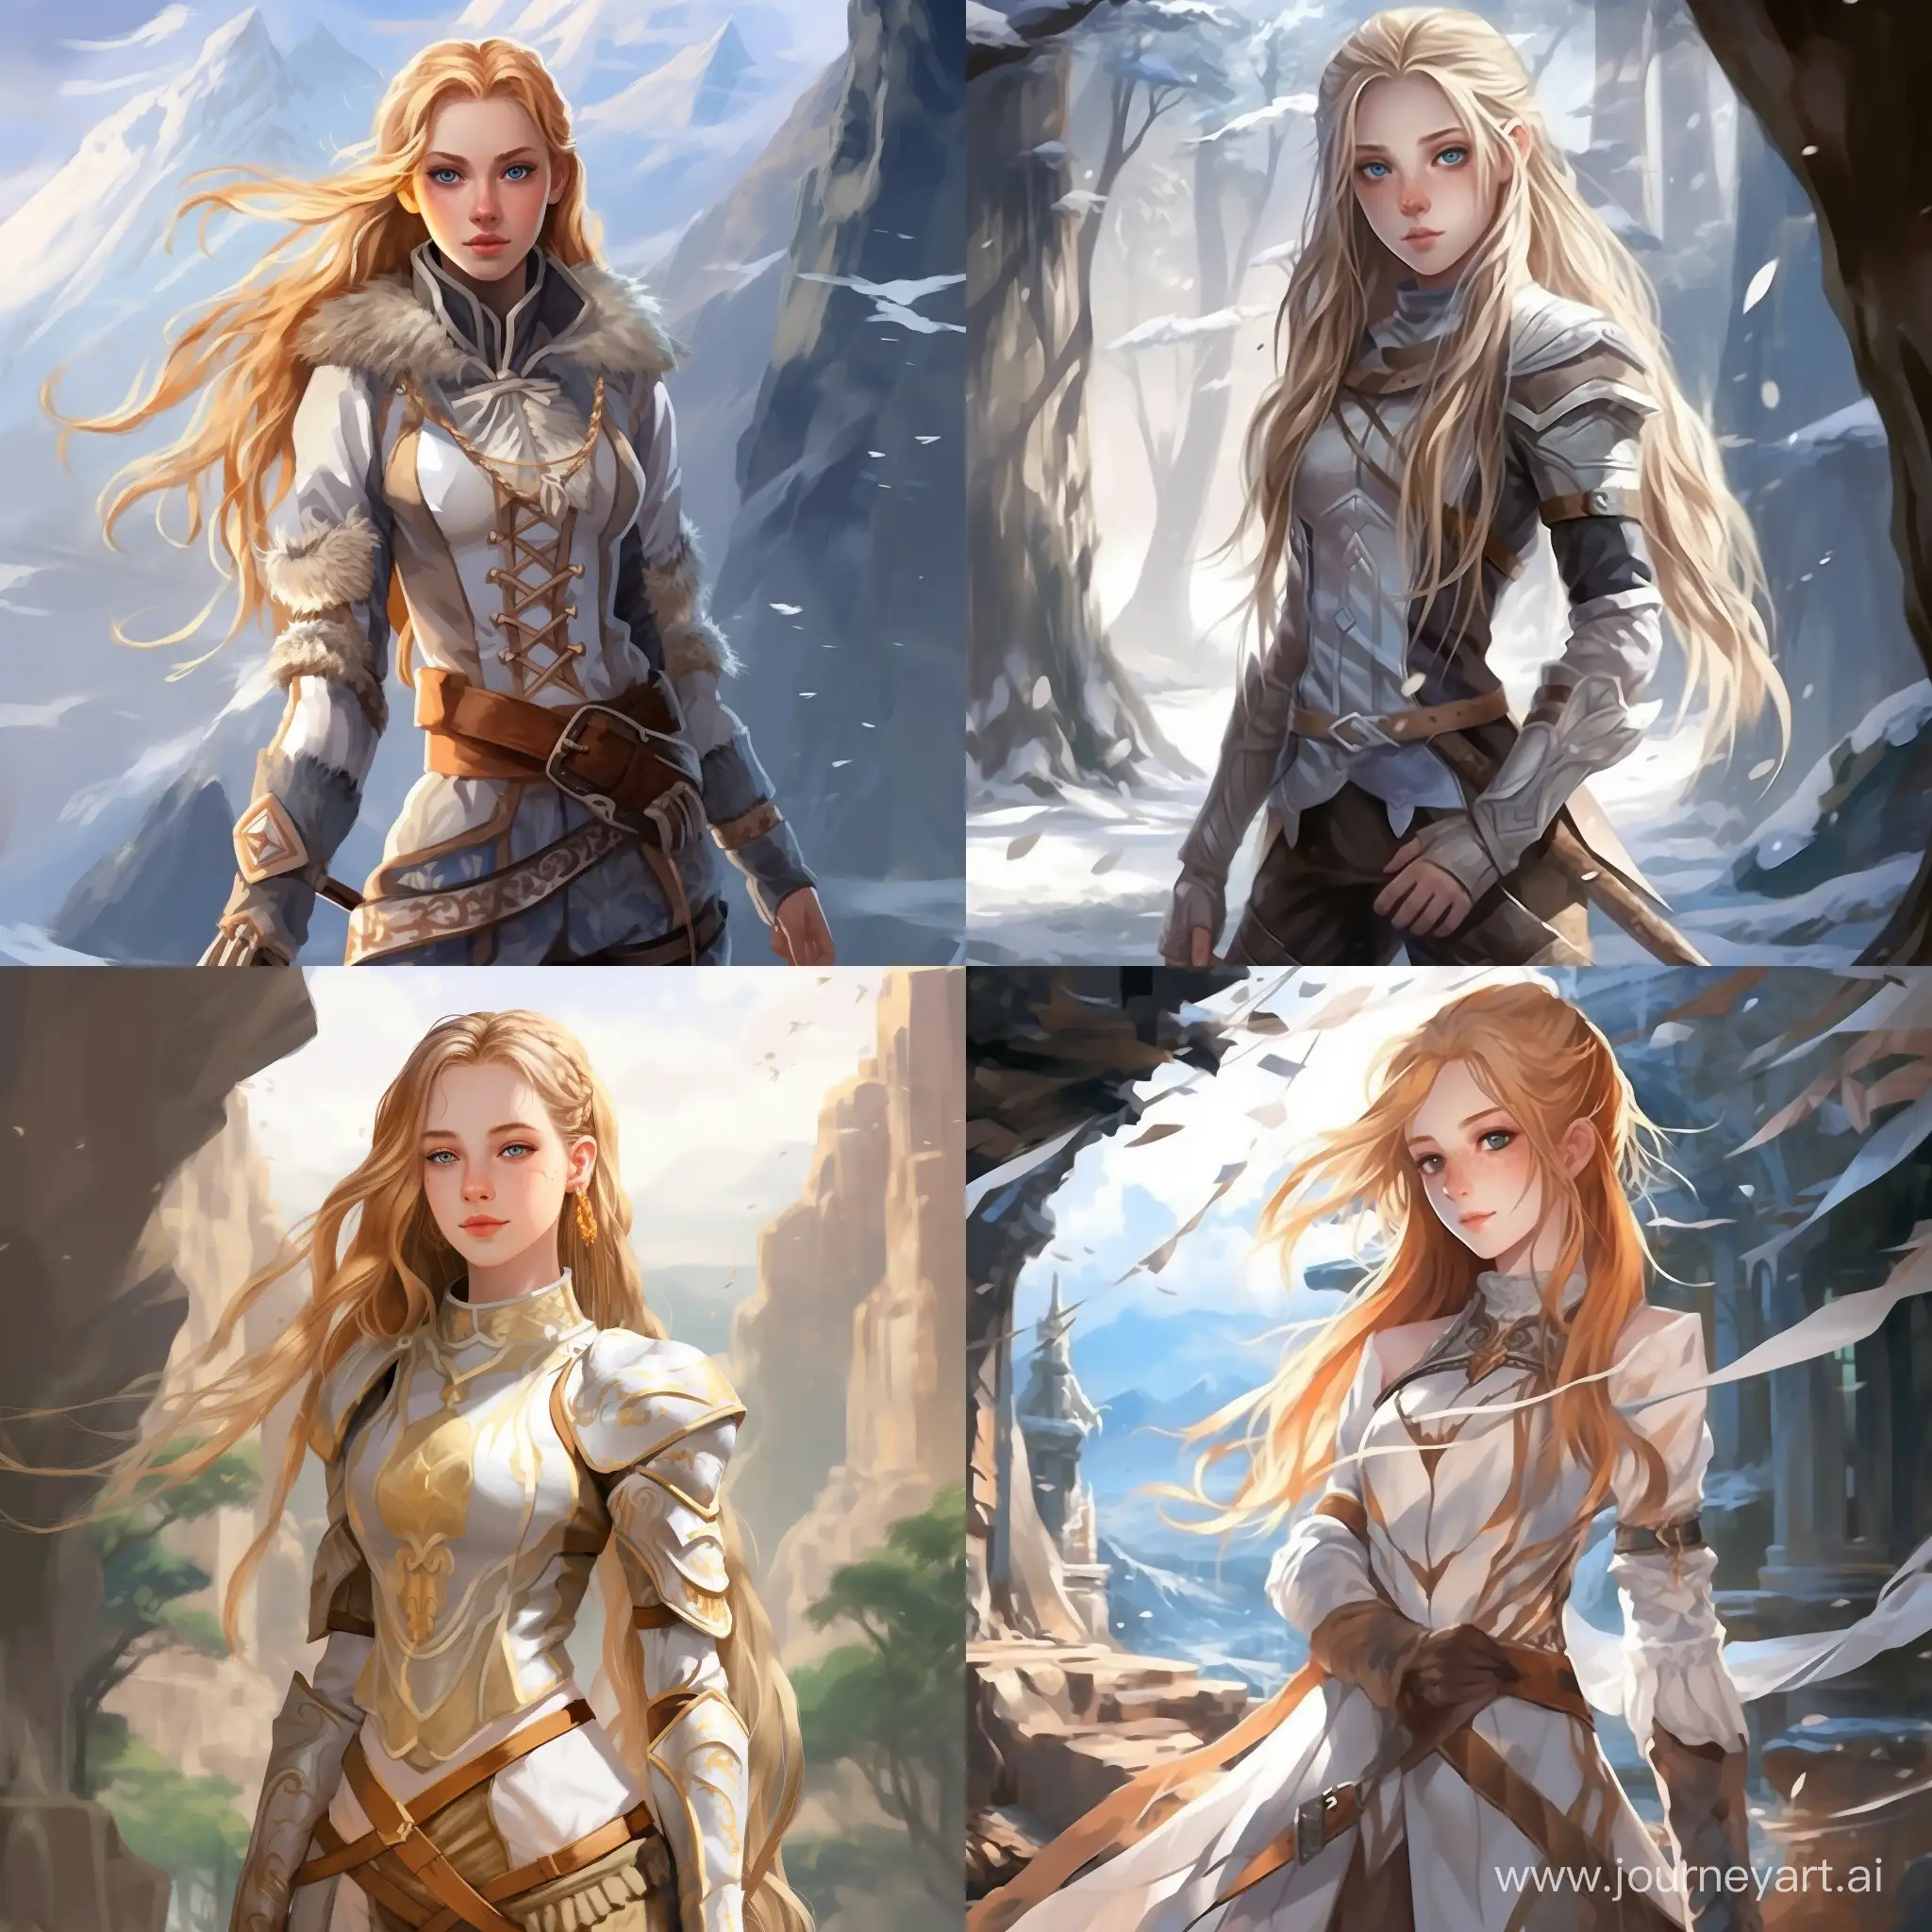 Enchanting-Teenage-Sorceress-with-Golden-Hair-in-Avatar-Style